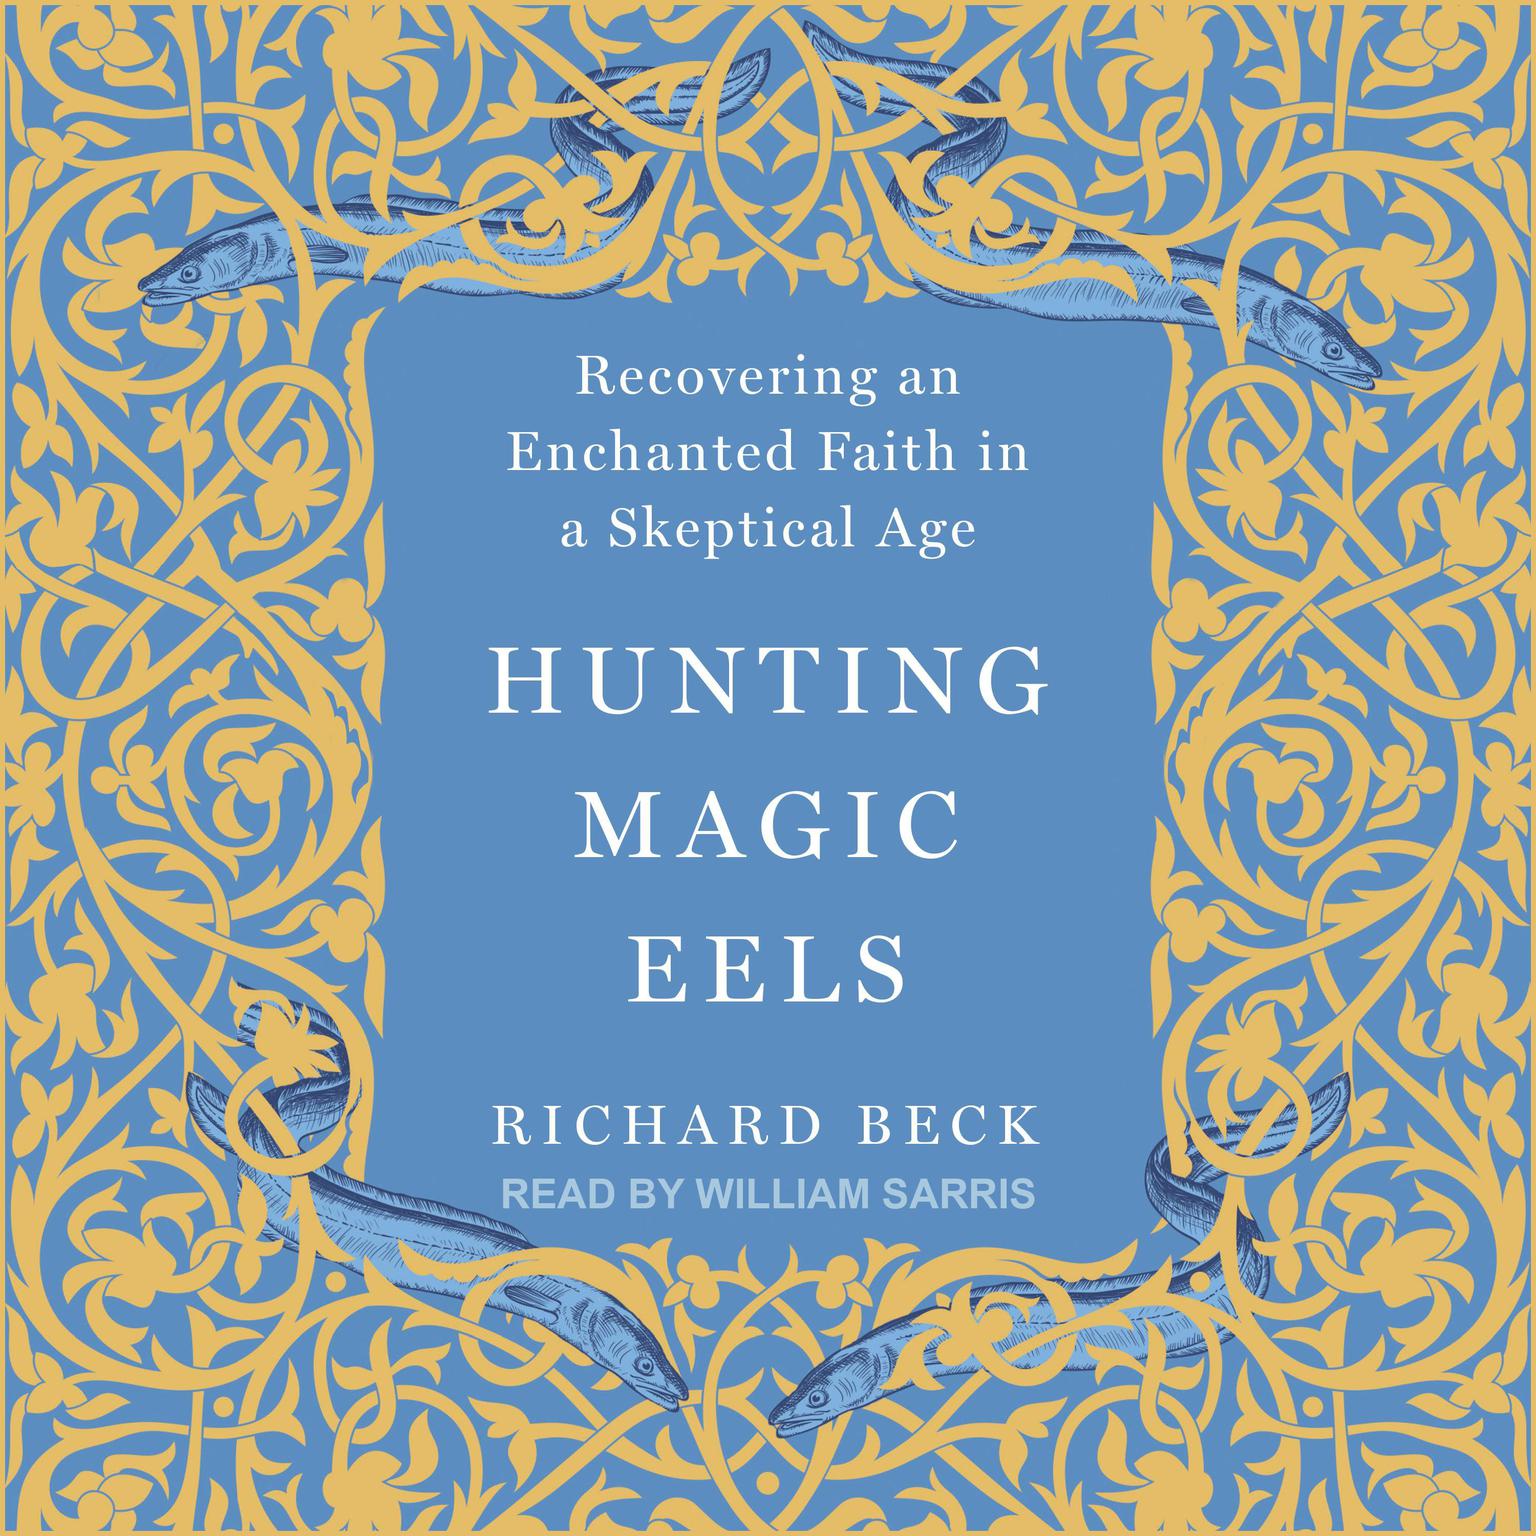 Hunting Magic Eels: Recovering an Enchanted Faith in a Skeptical Age Audiobook, by Richard Beck